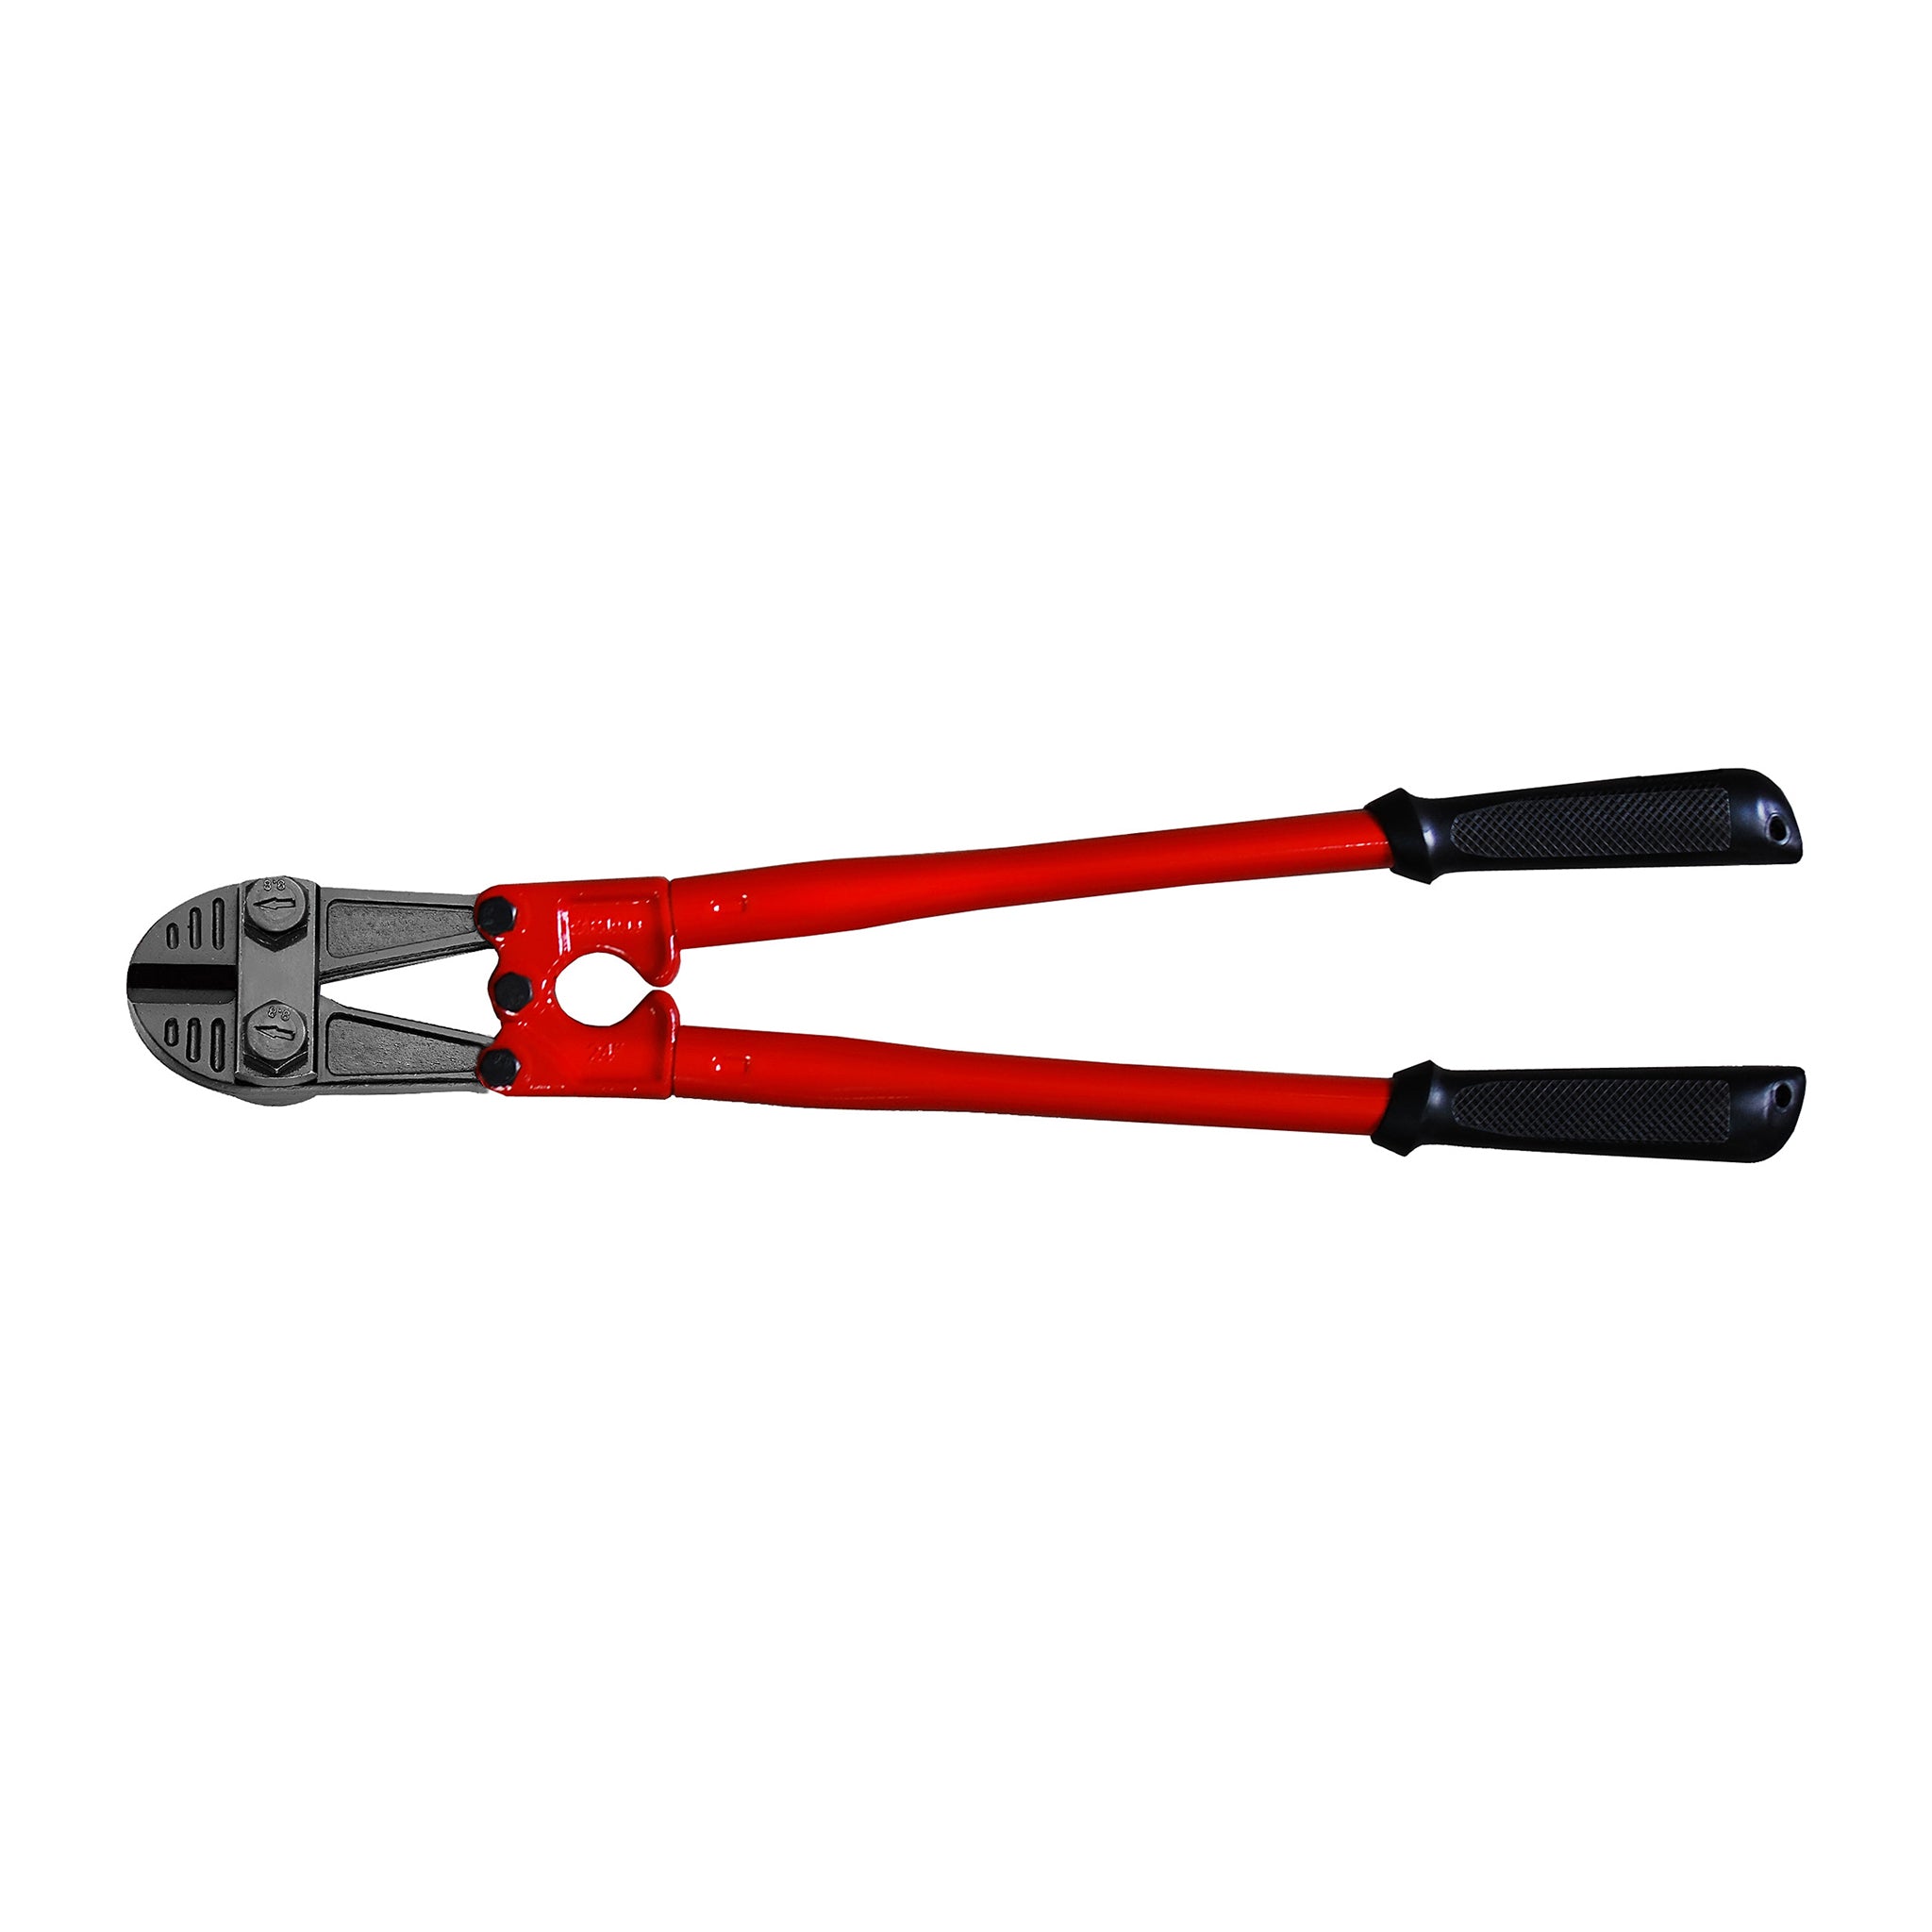 Teng Tools Bolt Cutters With Dipped Handle 8 To 36 Inches - 14 Inch